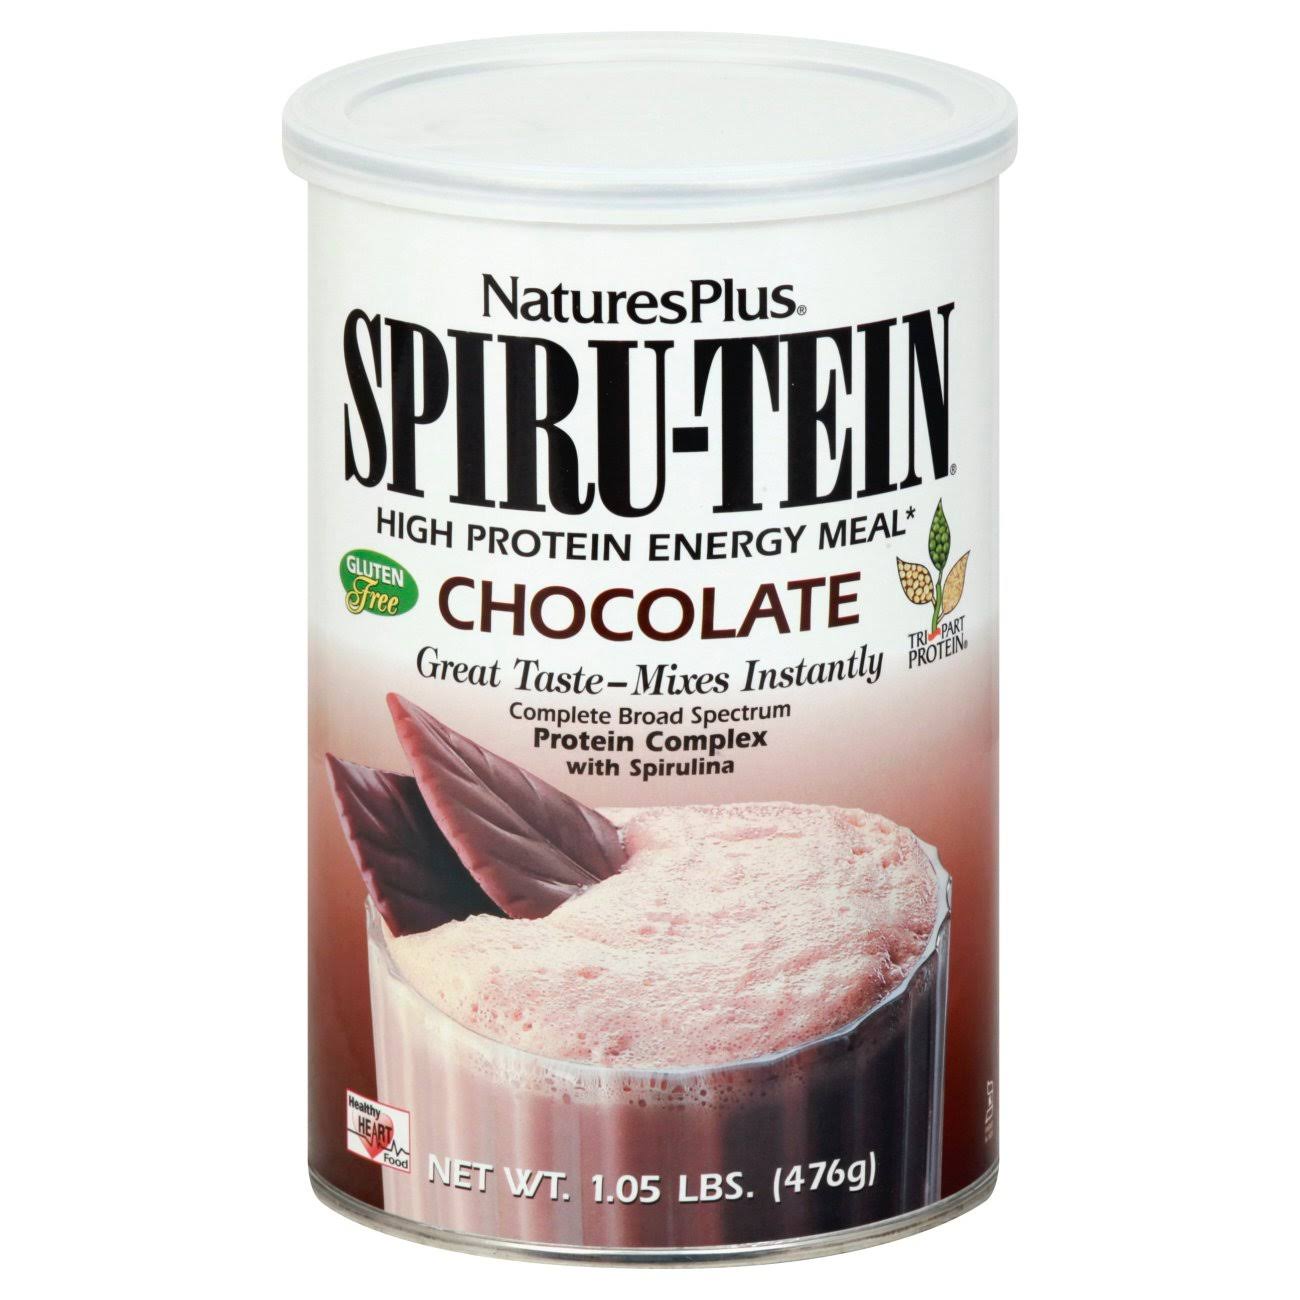 Nature's Plus Spiru-Tein Whey High Protein Energy Meal - Chocolate, 476g